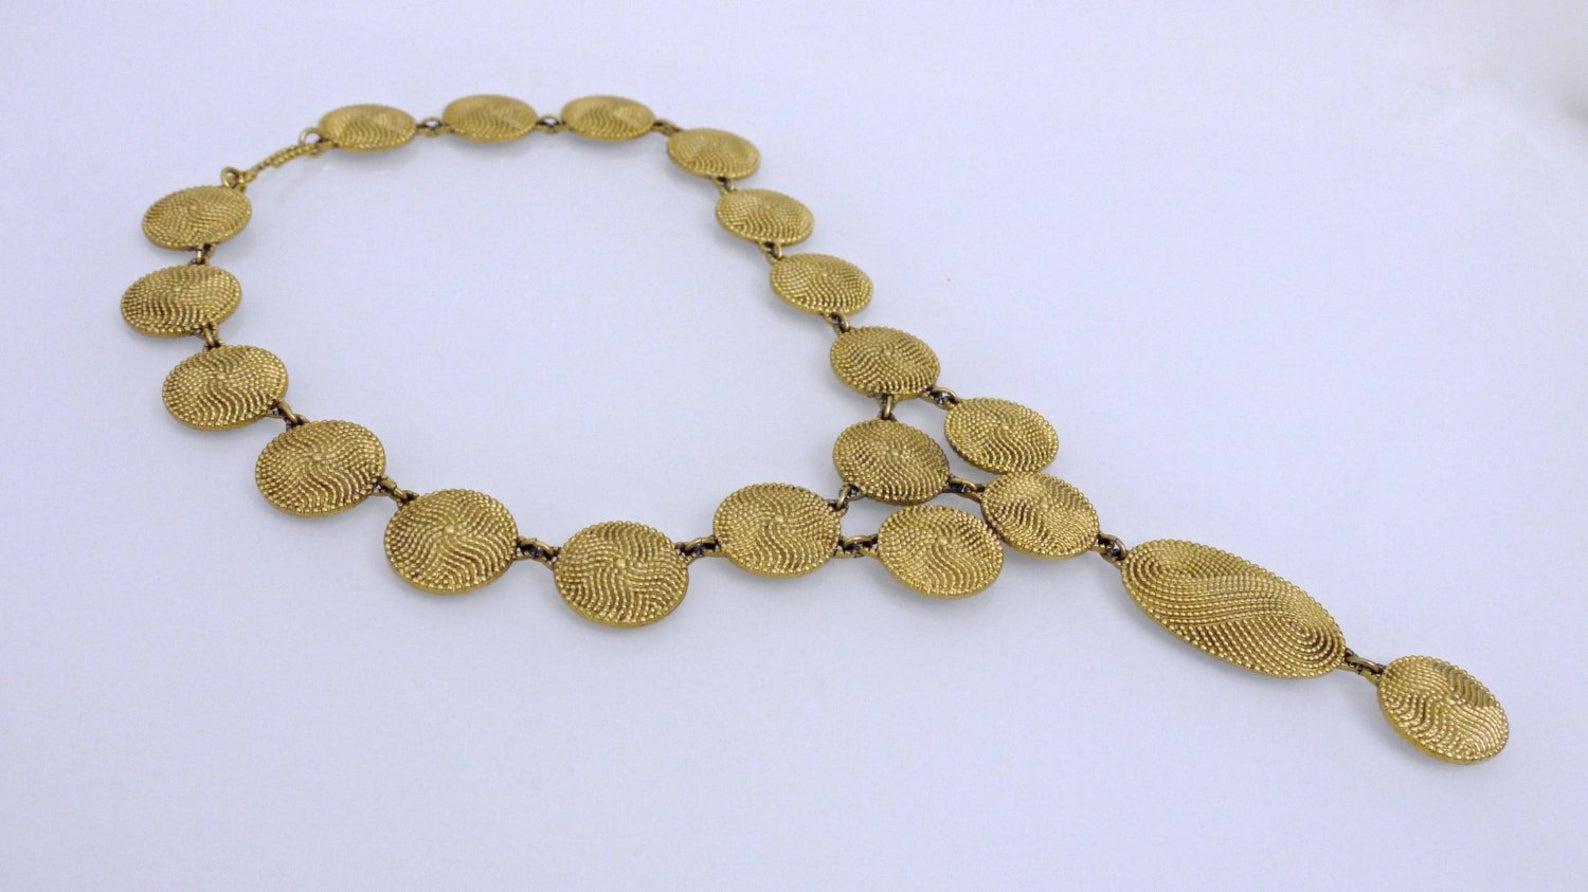 Vintage Yves Saint Laurent Disc Lariat Necklace

Measurements:
Height: 4 6/8 inches (center piece)
Discs: 6/8 inch X 6/8 inch
Wearable Length: 17 inches

Features:
- 100% authentic YVES SAINT LAURENT.
- Dotted discs with wave pattern.
- Articulated